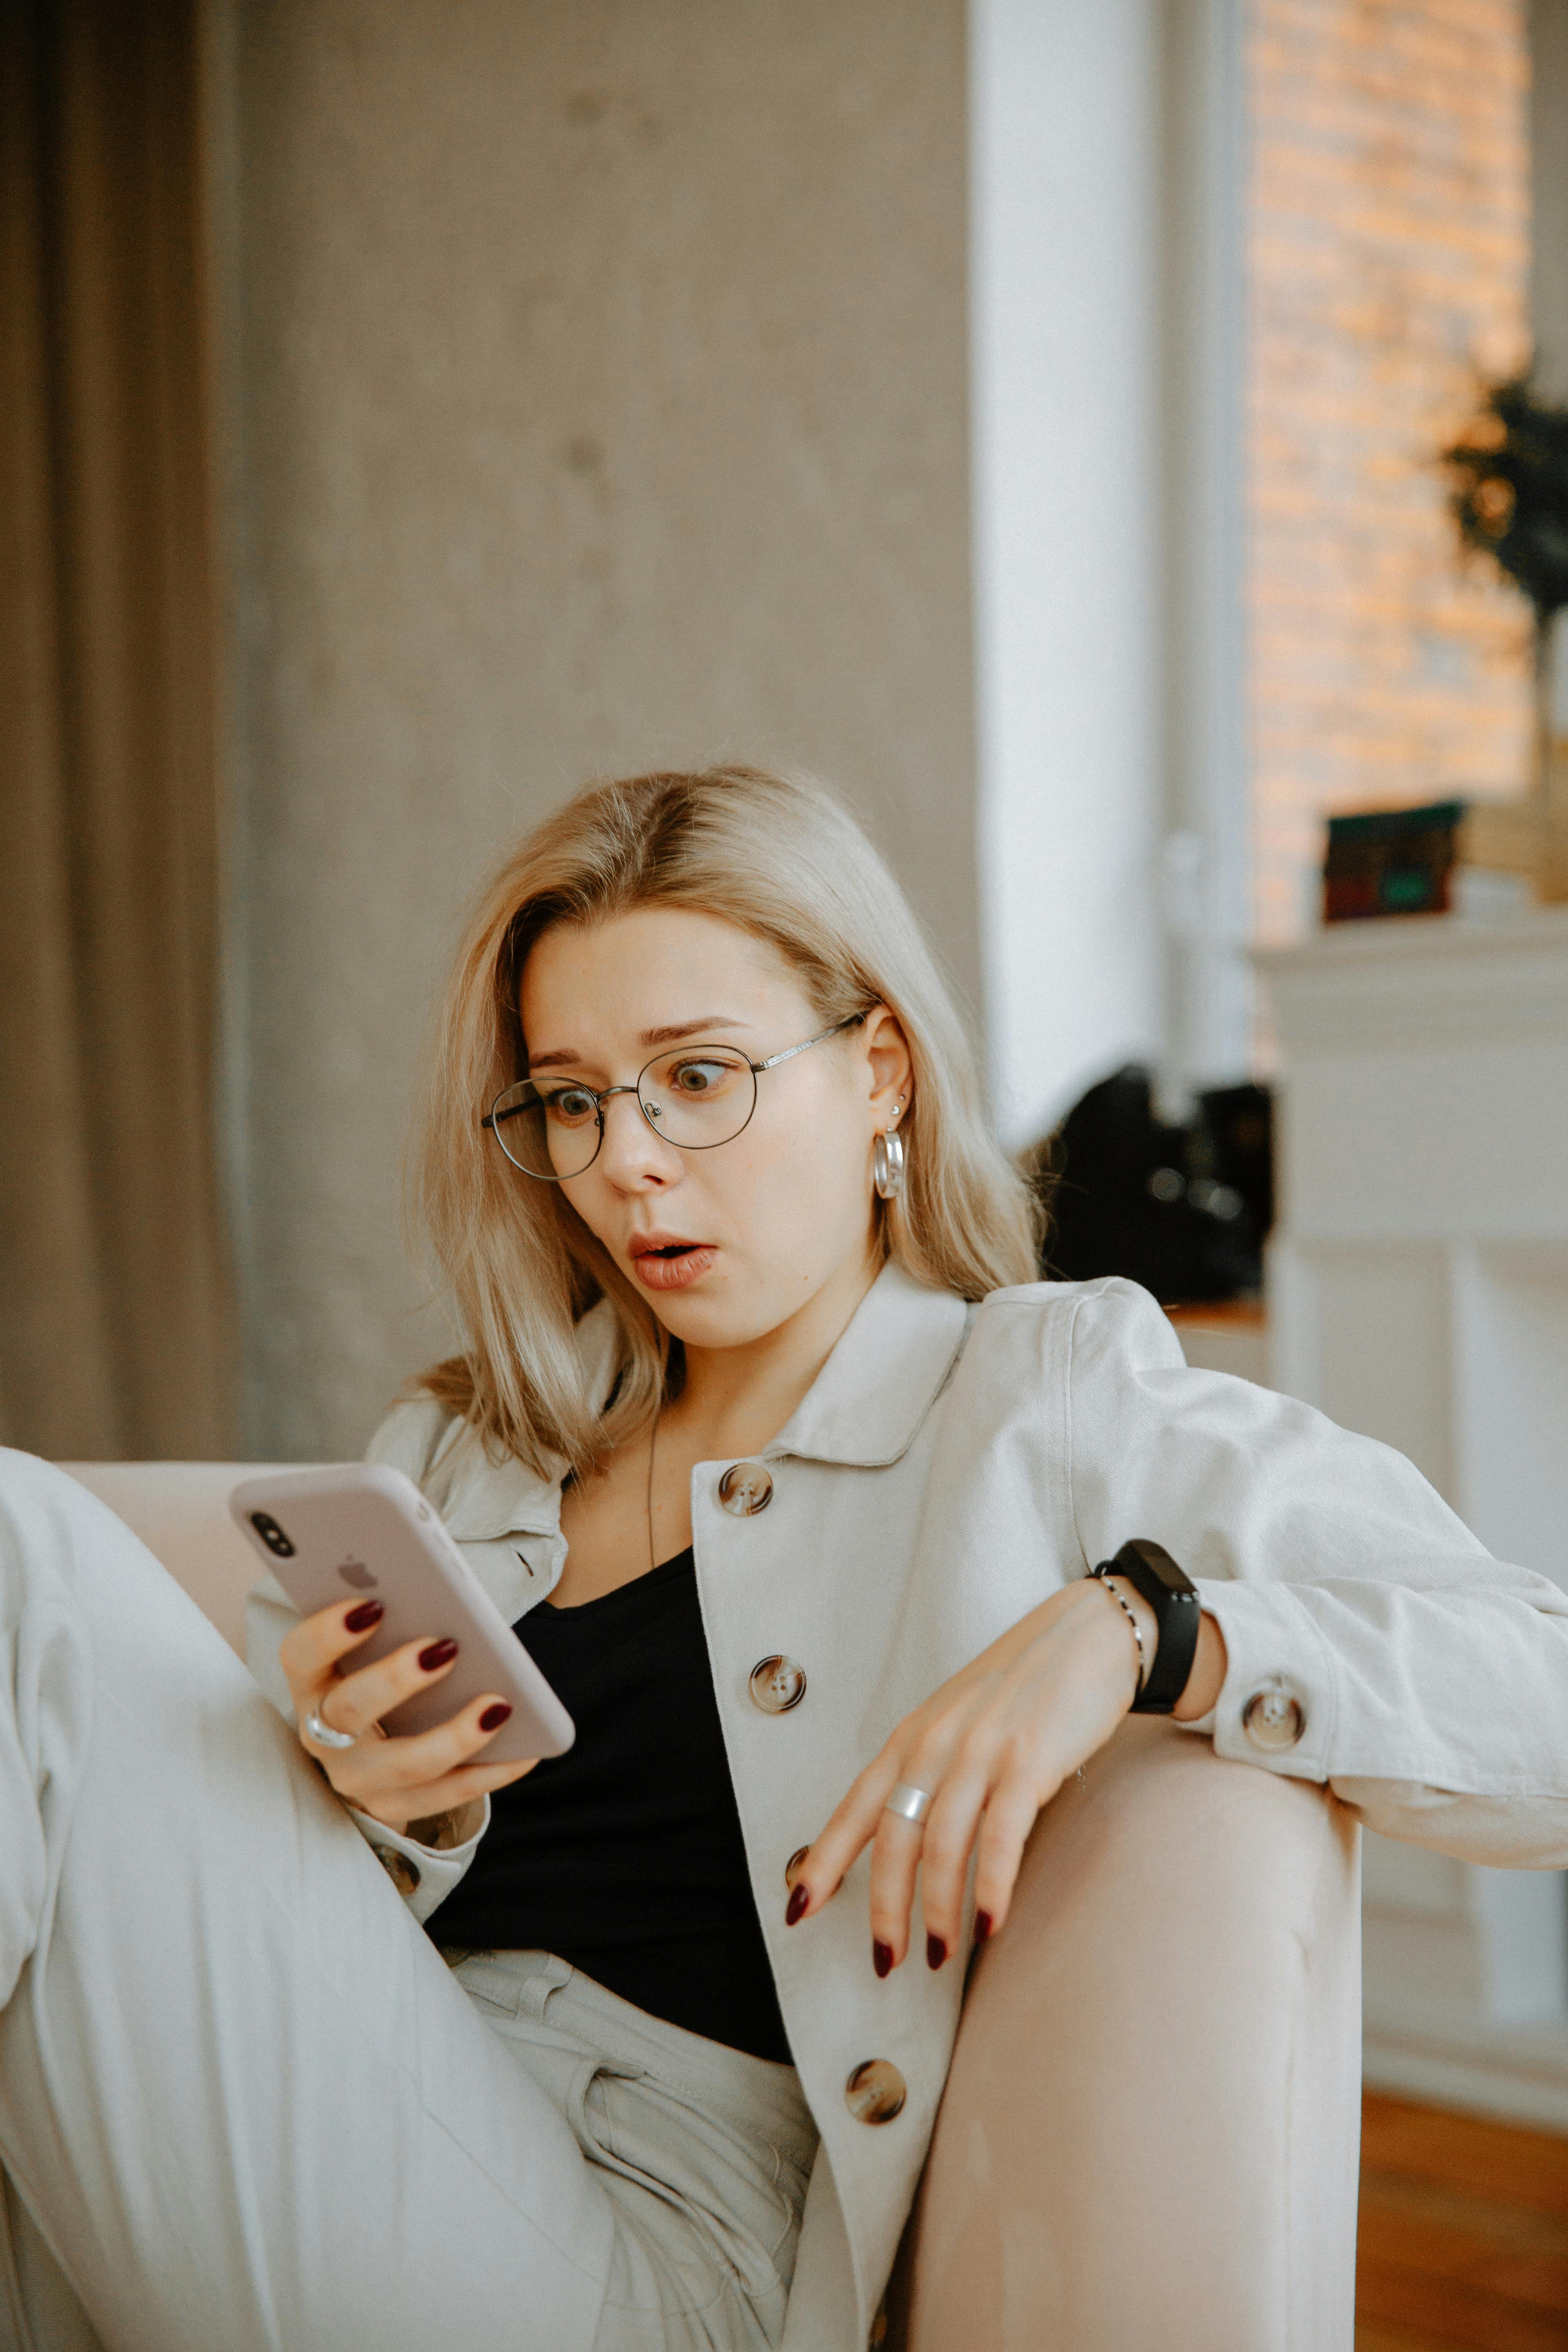 A shocked woman looking at something on a phone | Source: Pexels